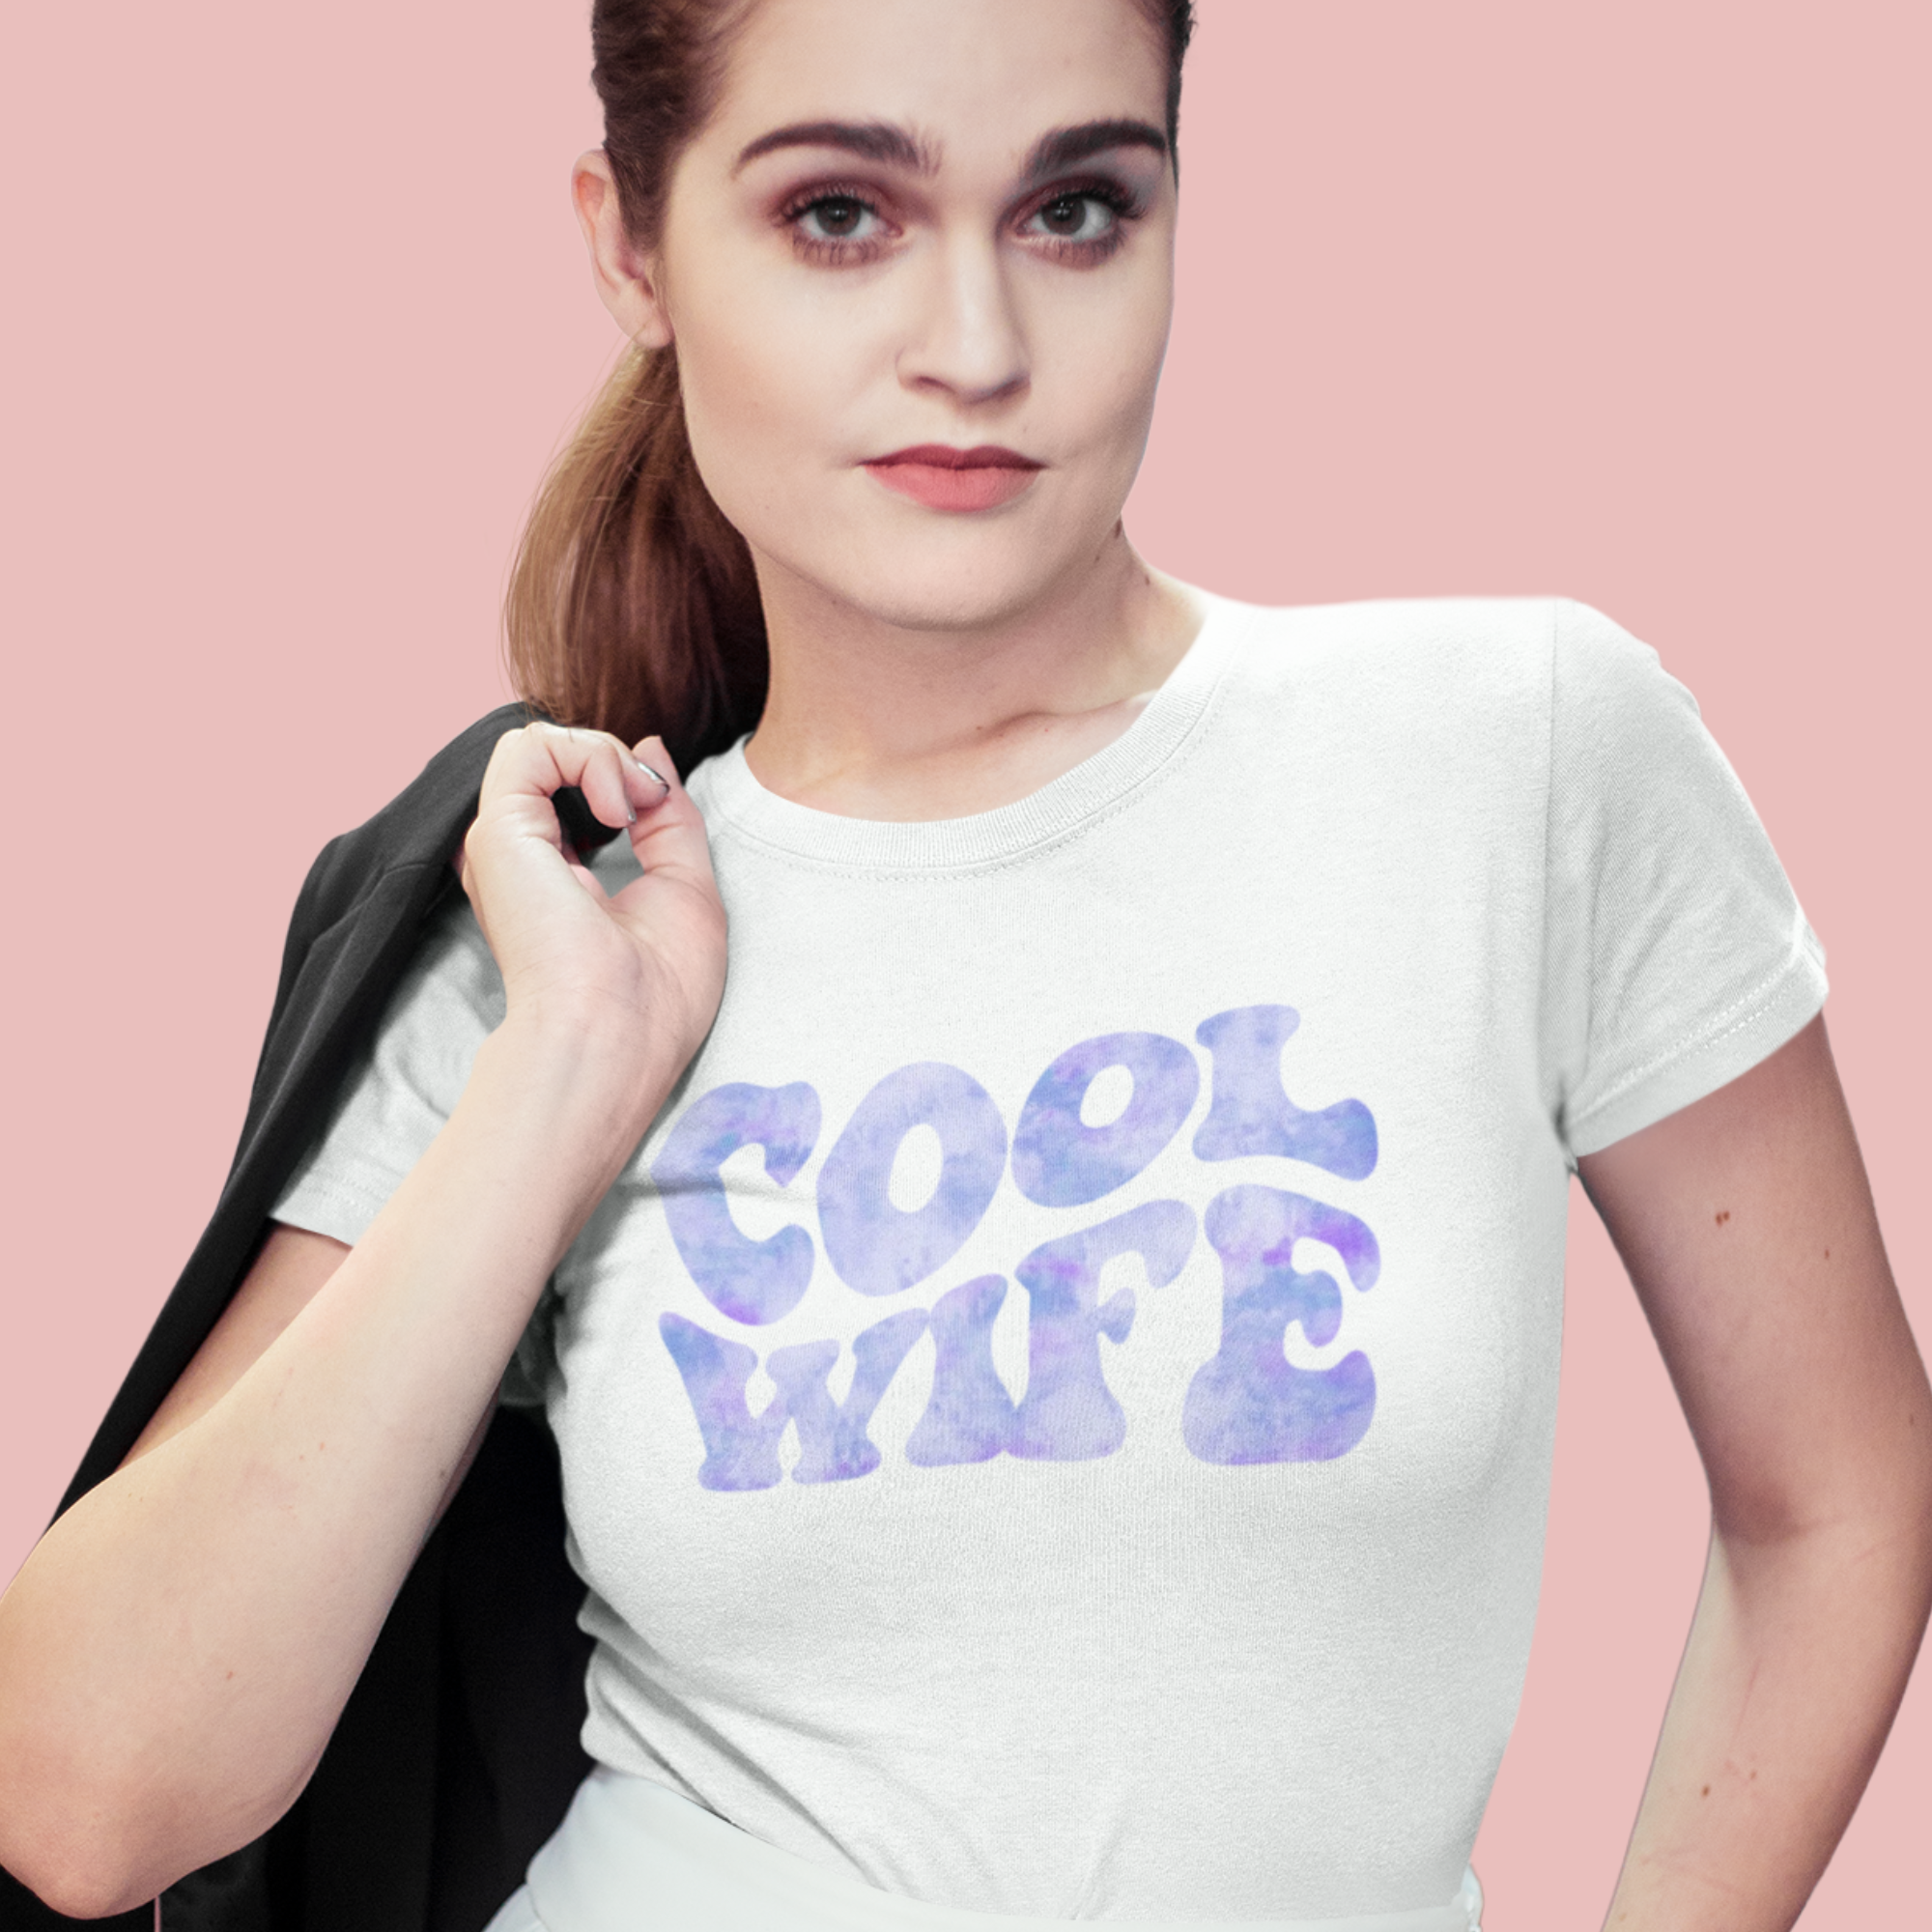 Woman wearing a t shirt with 